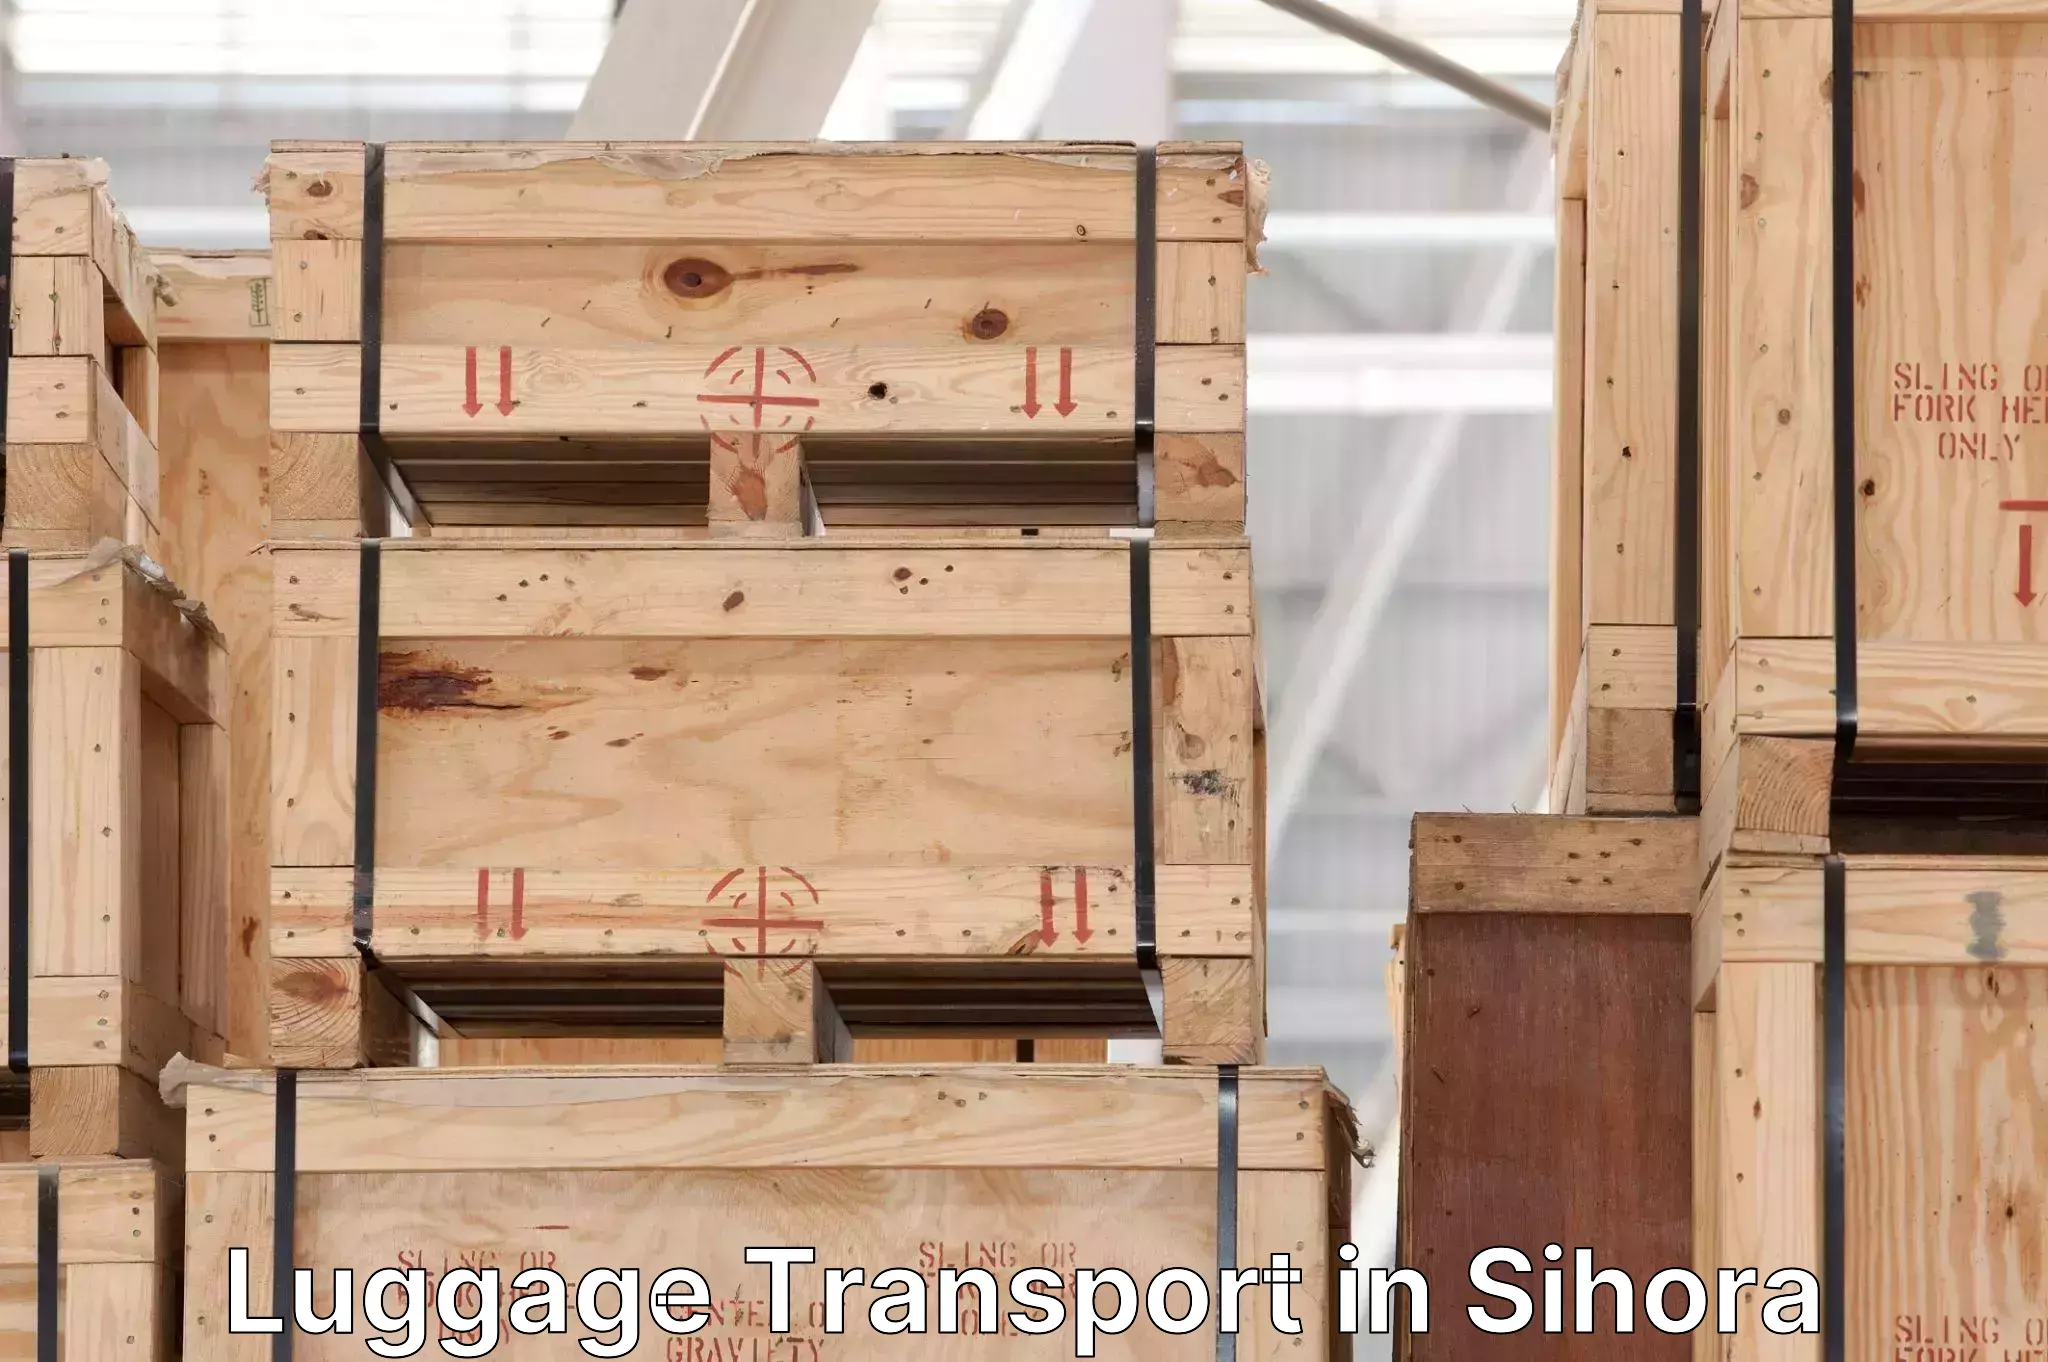 Nationwide luggage transport in Sihora